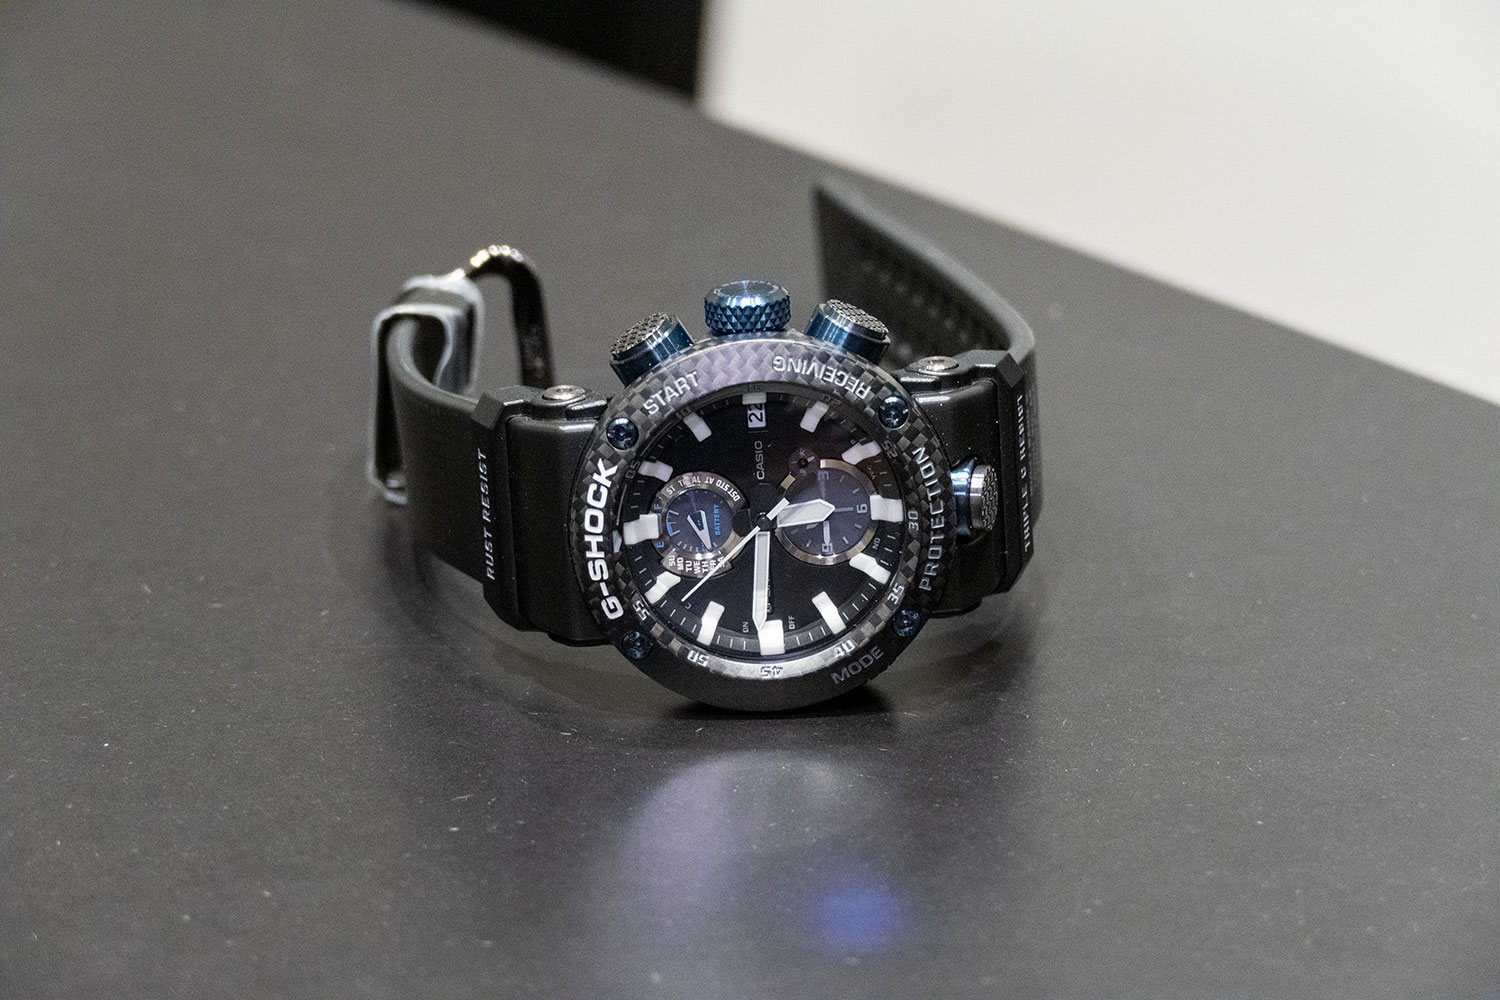 Casio Gravitymaster review